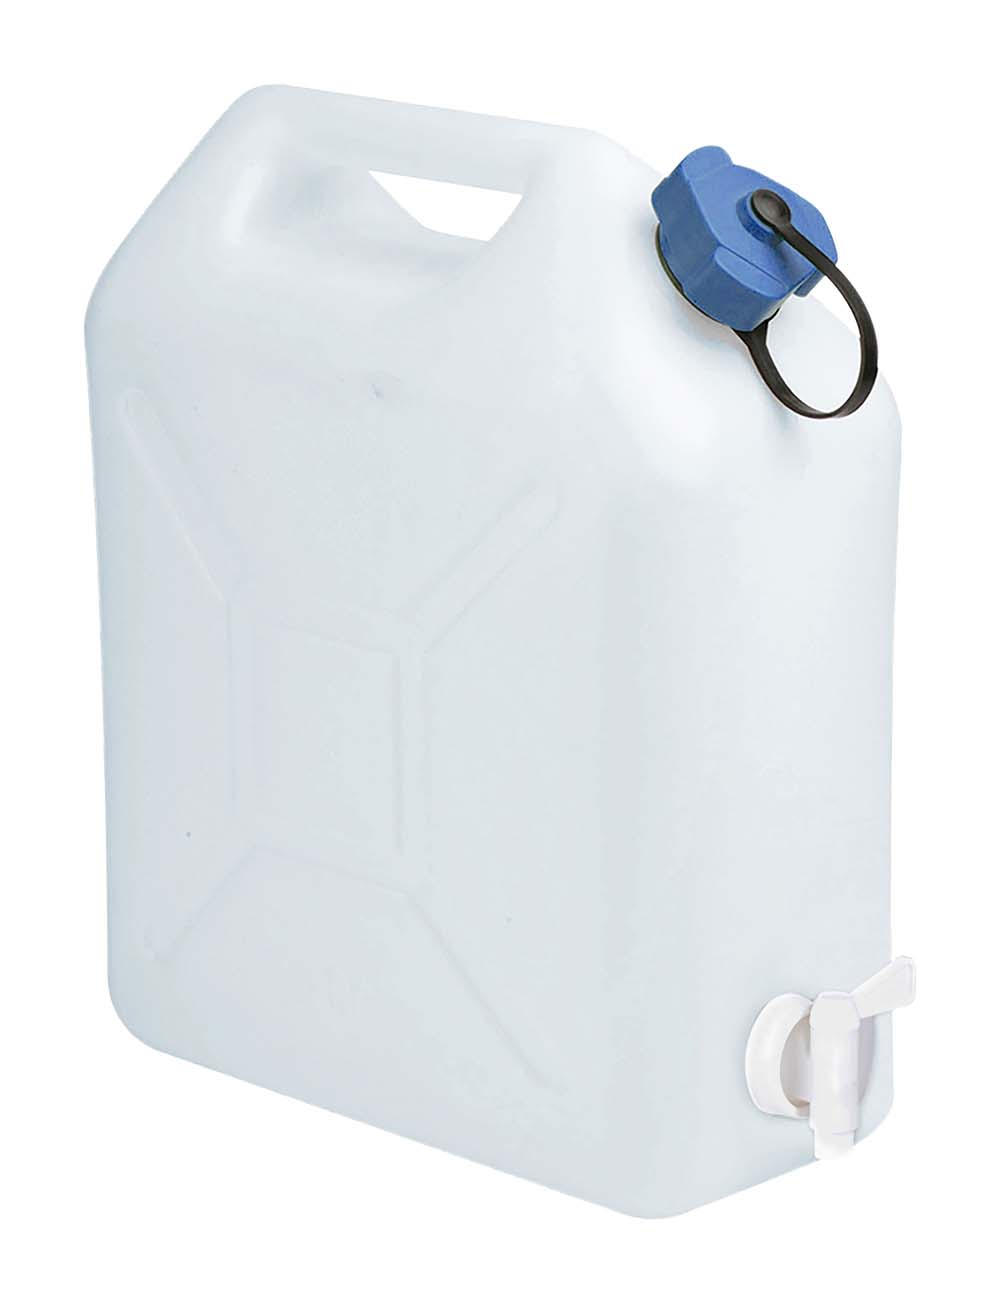 6603645 A jerrycan with a tap. With strong walls, a breather cap and a movable tap for pouring.